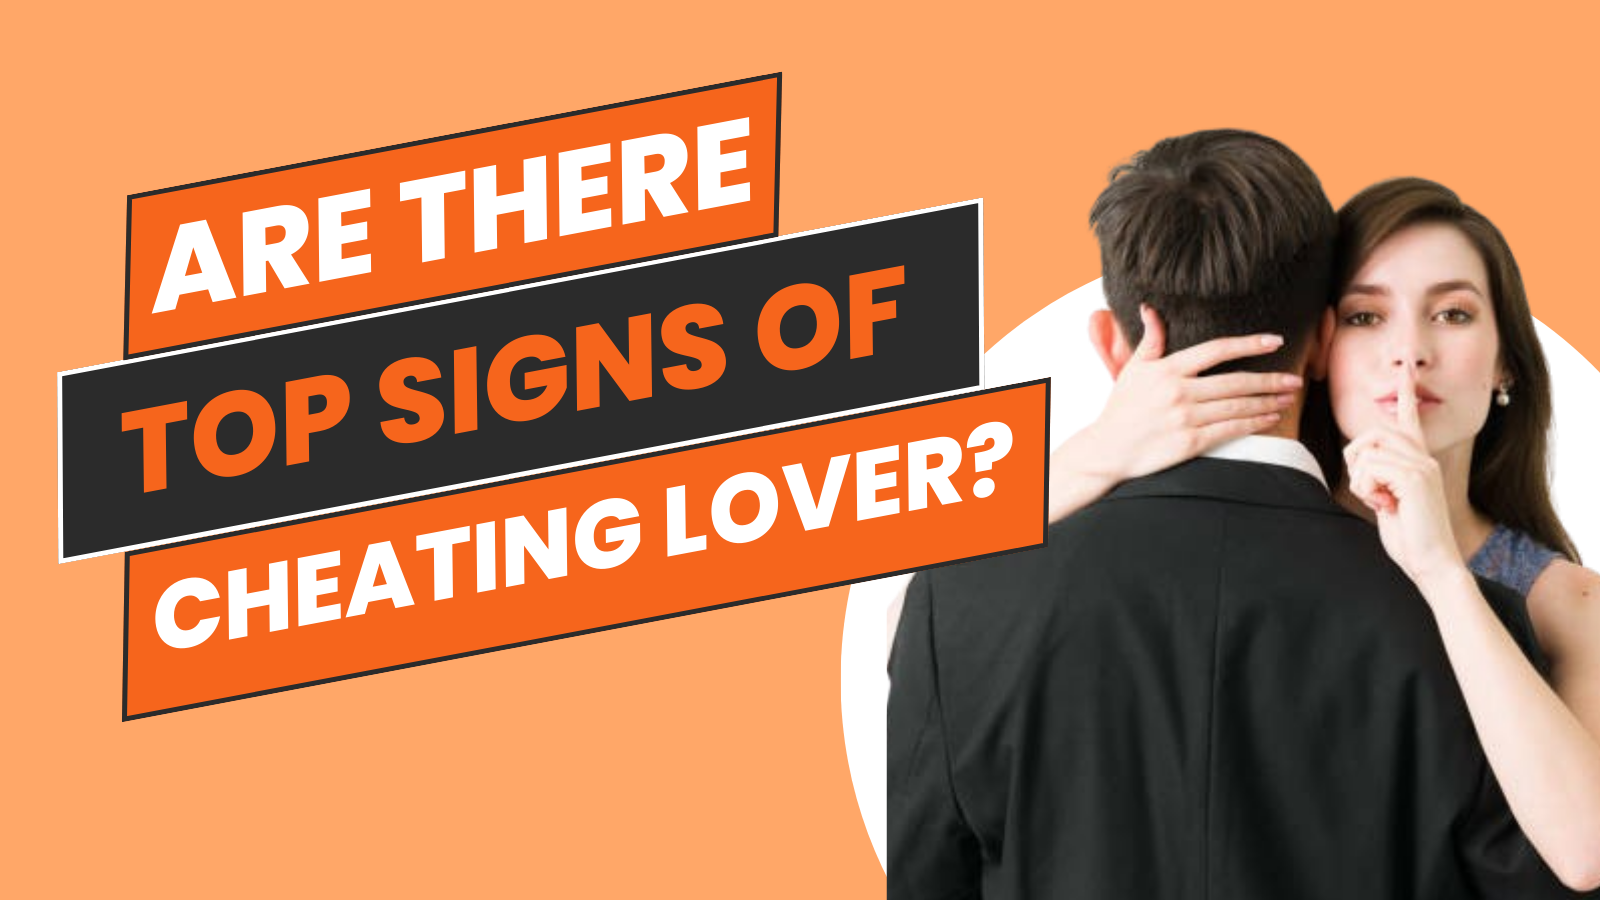 top-signs-of-cheating-lover